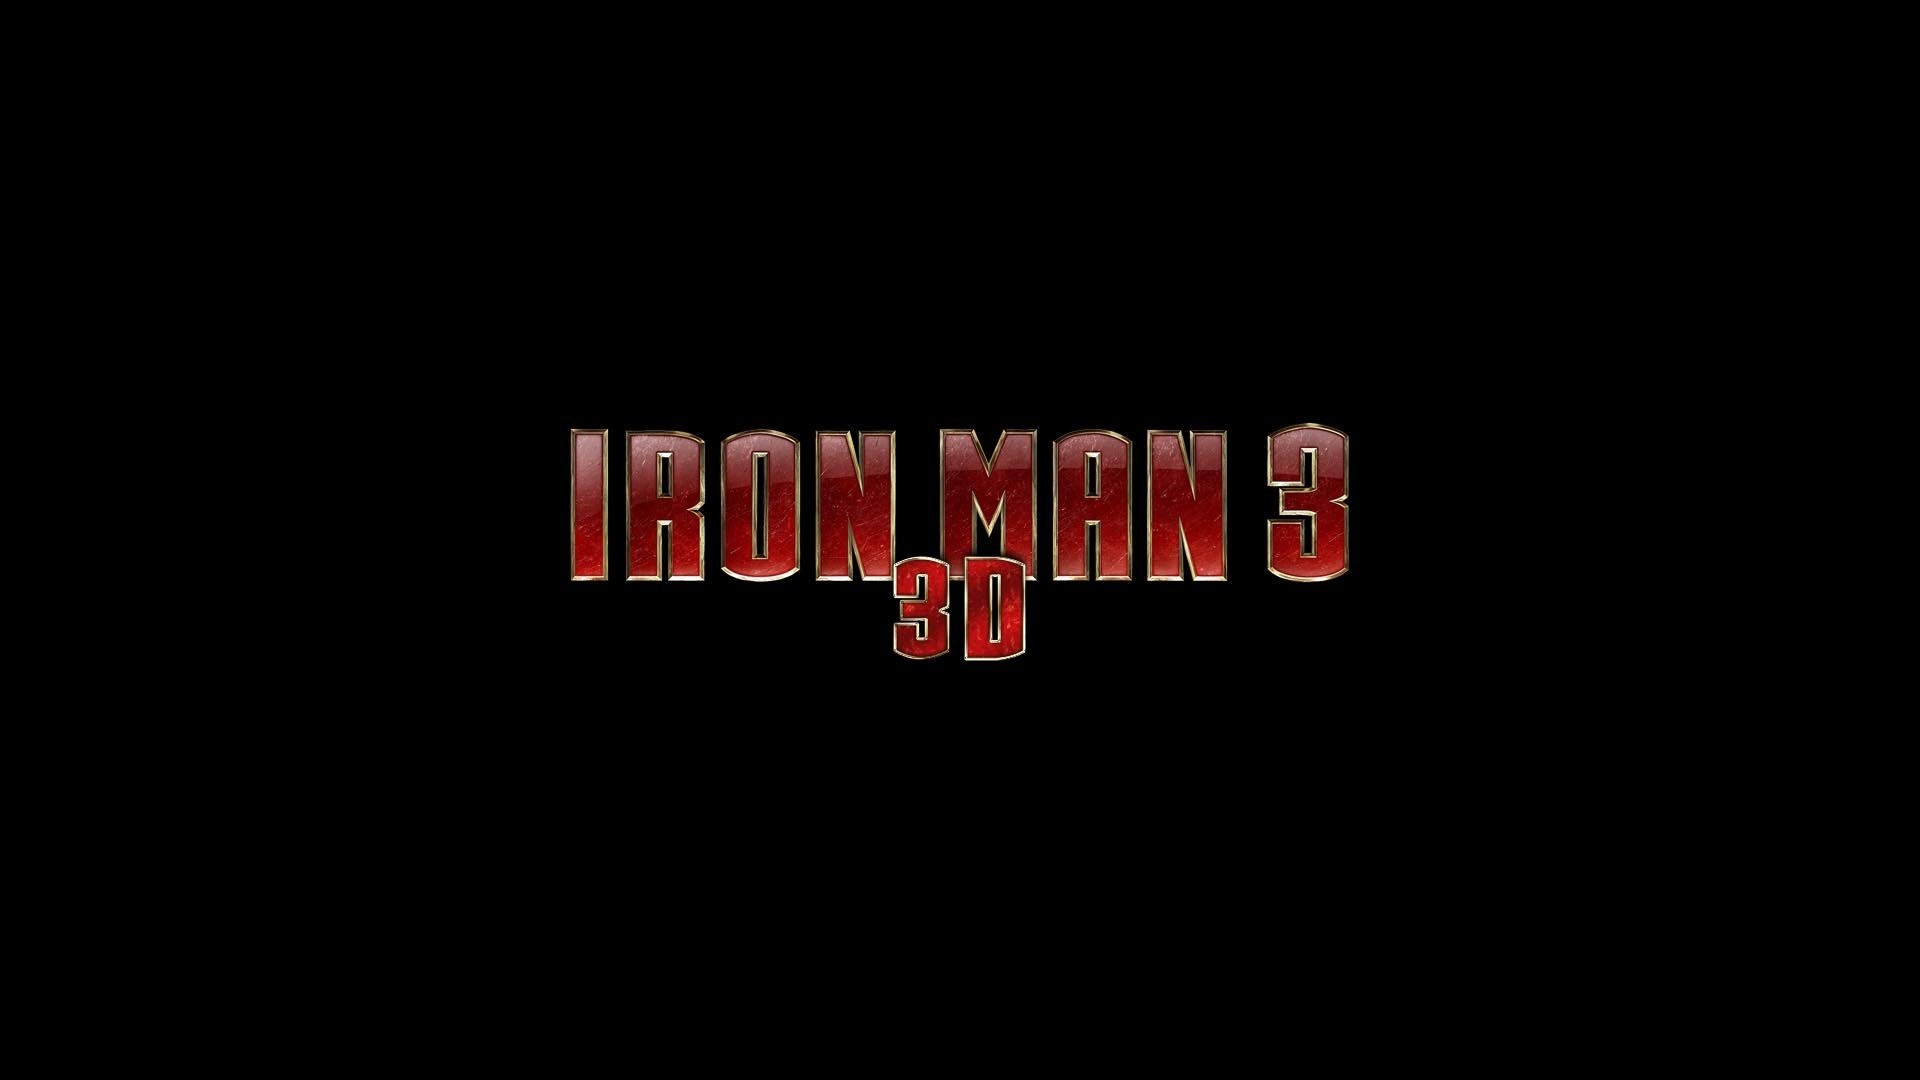 Iron Man 3 download the new version for iphone